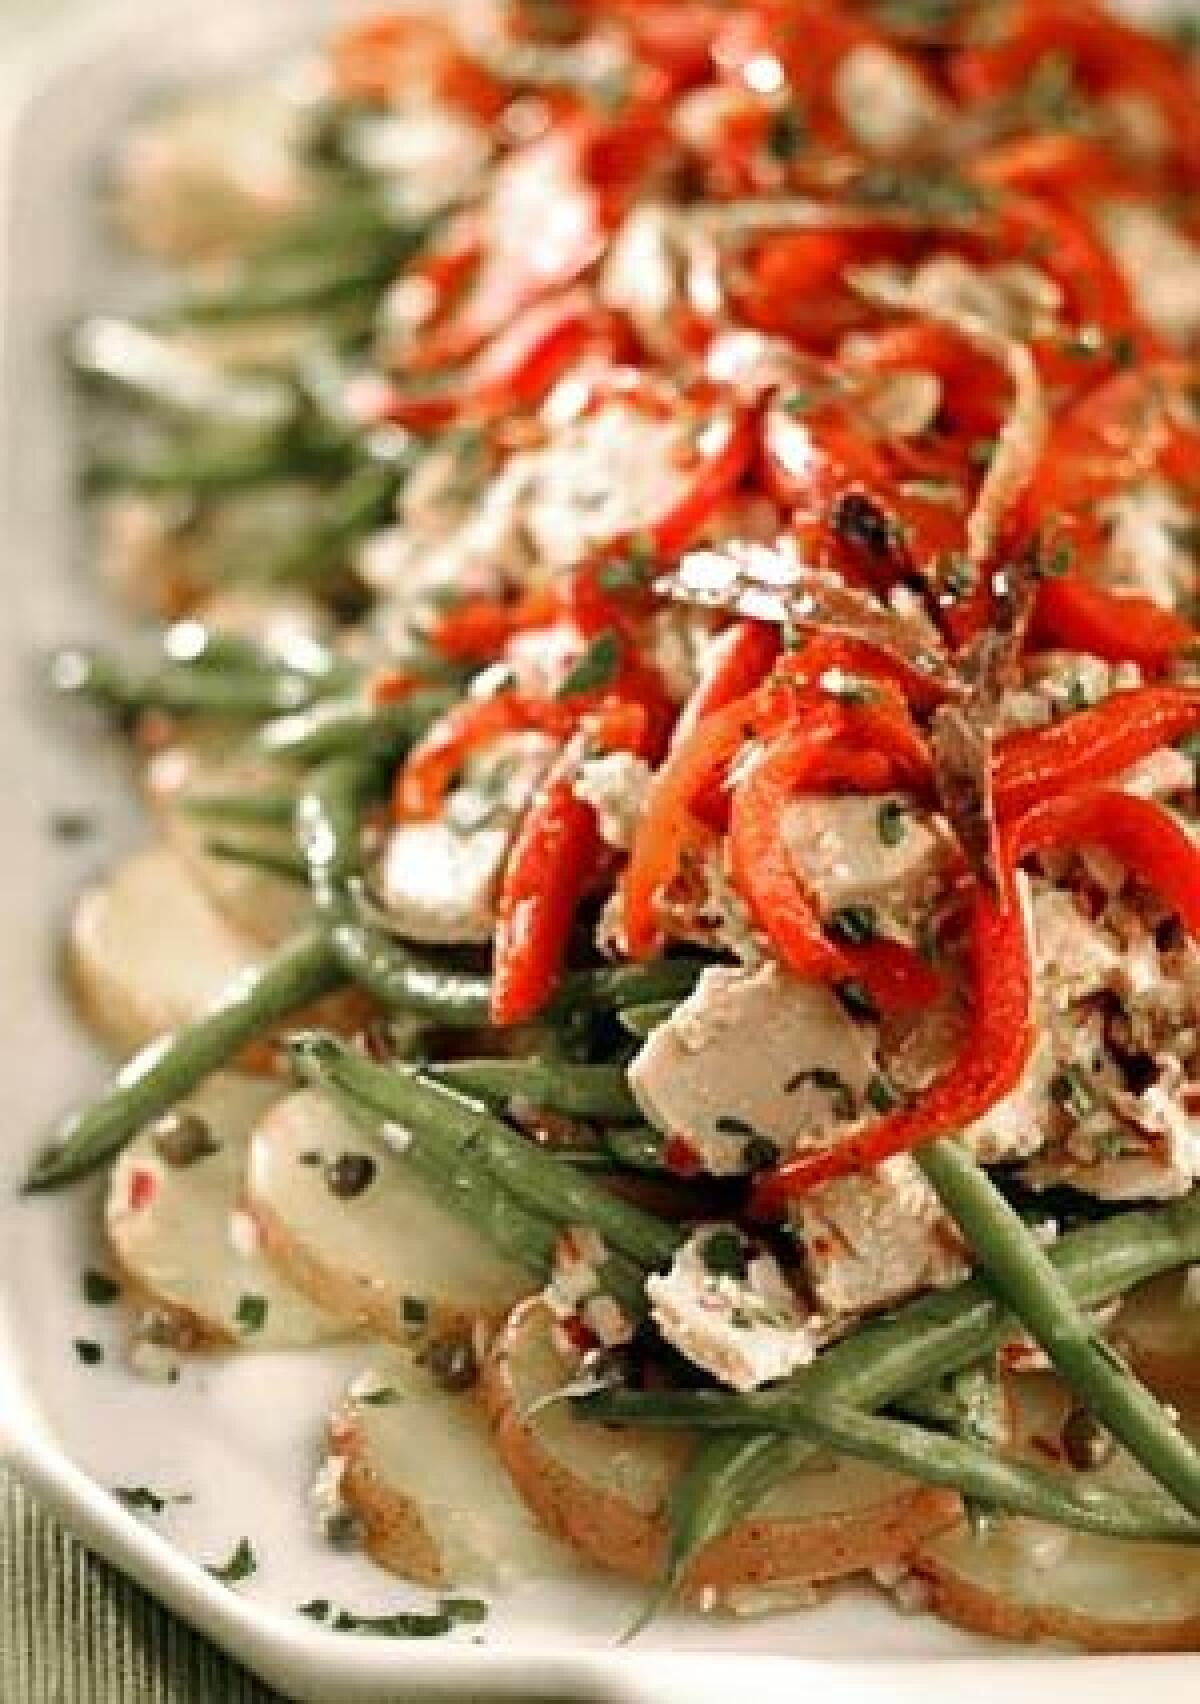 SALAD: Conserved tuna, potatoes and green beans is a southern France favorite. RECIPE: Tuna, potato and green bean salad